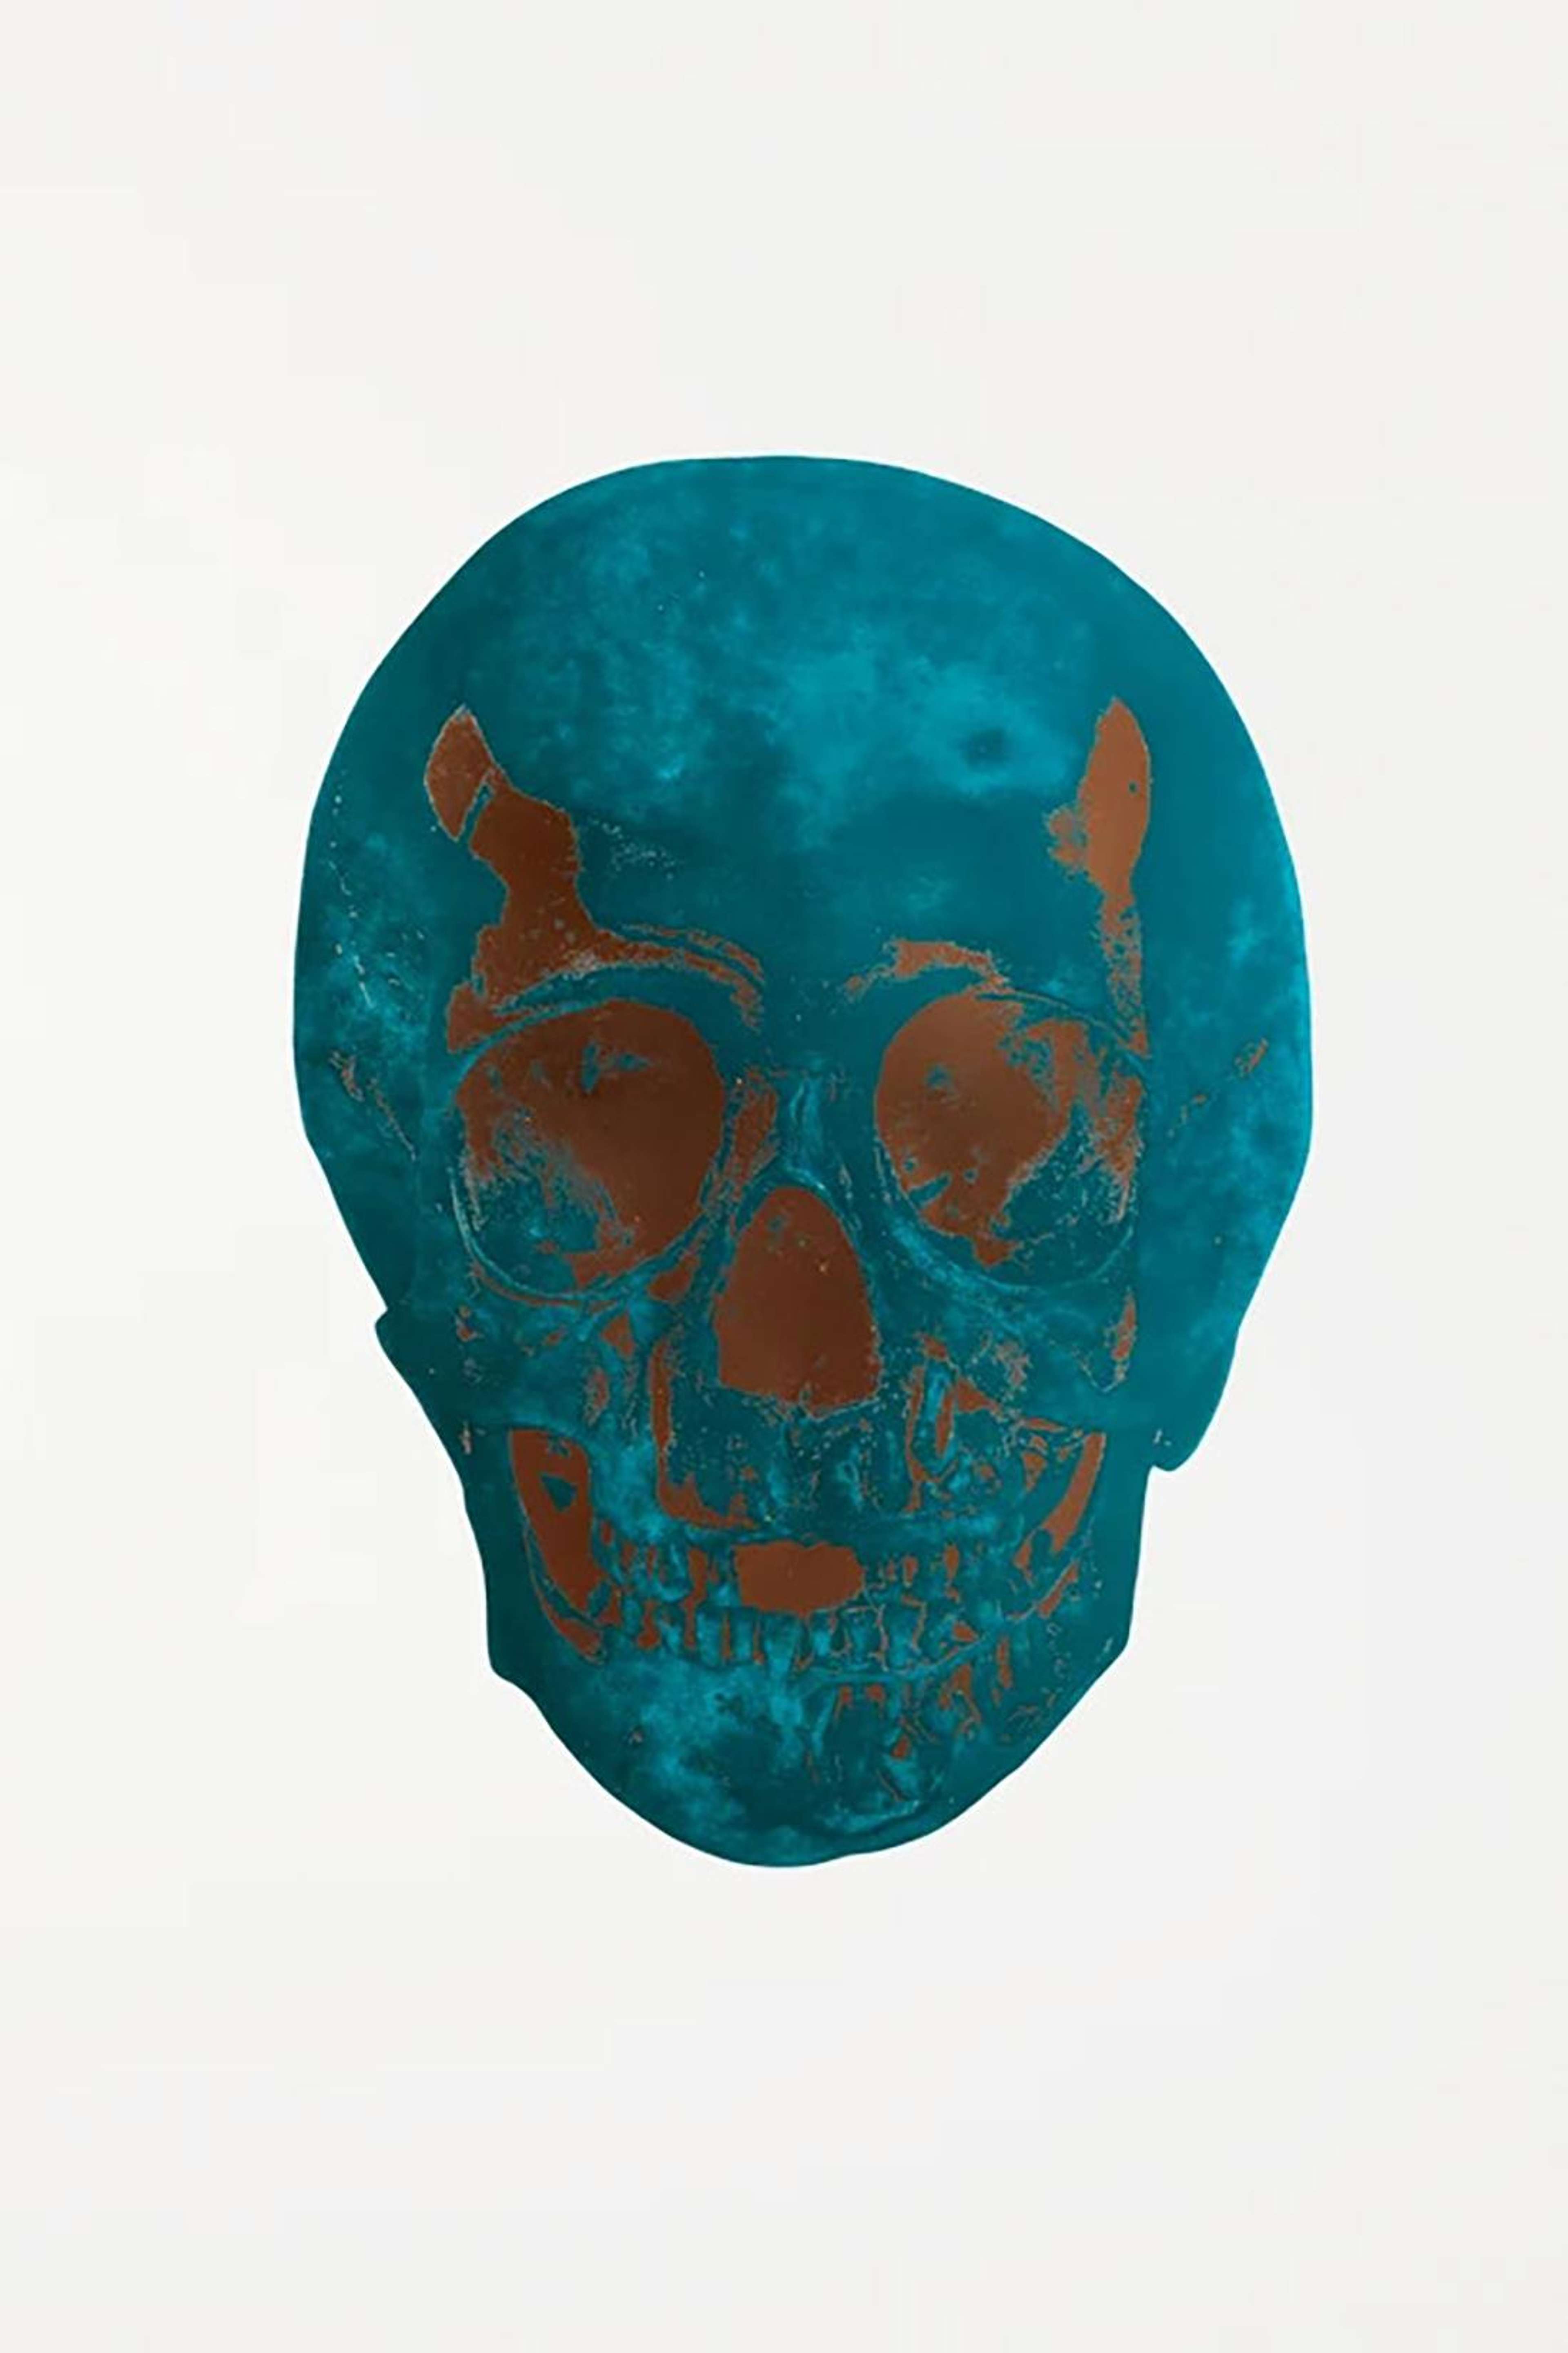 The Dead (turquoise, panama copper) - Signed Print